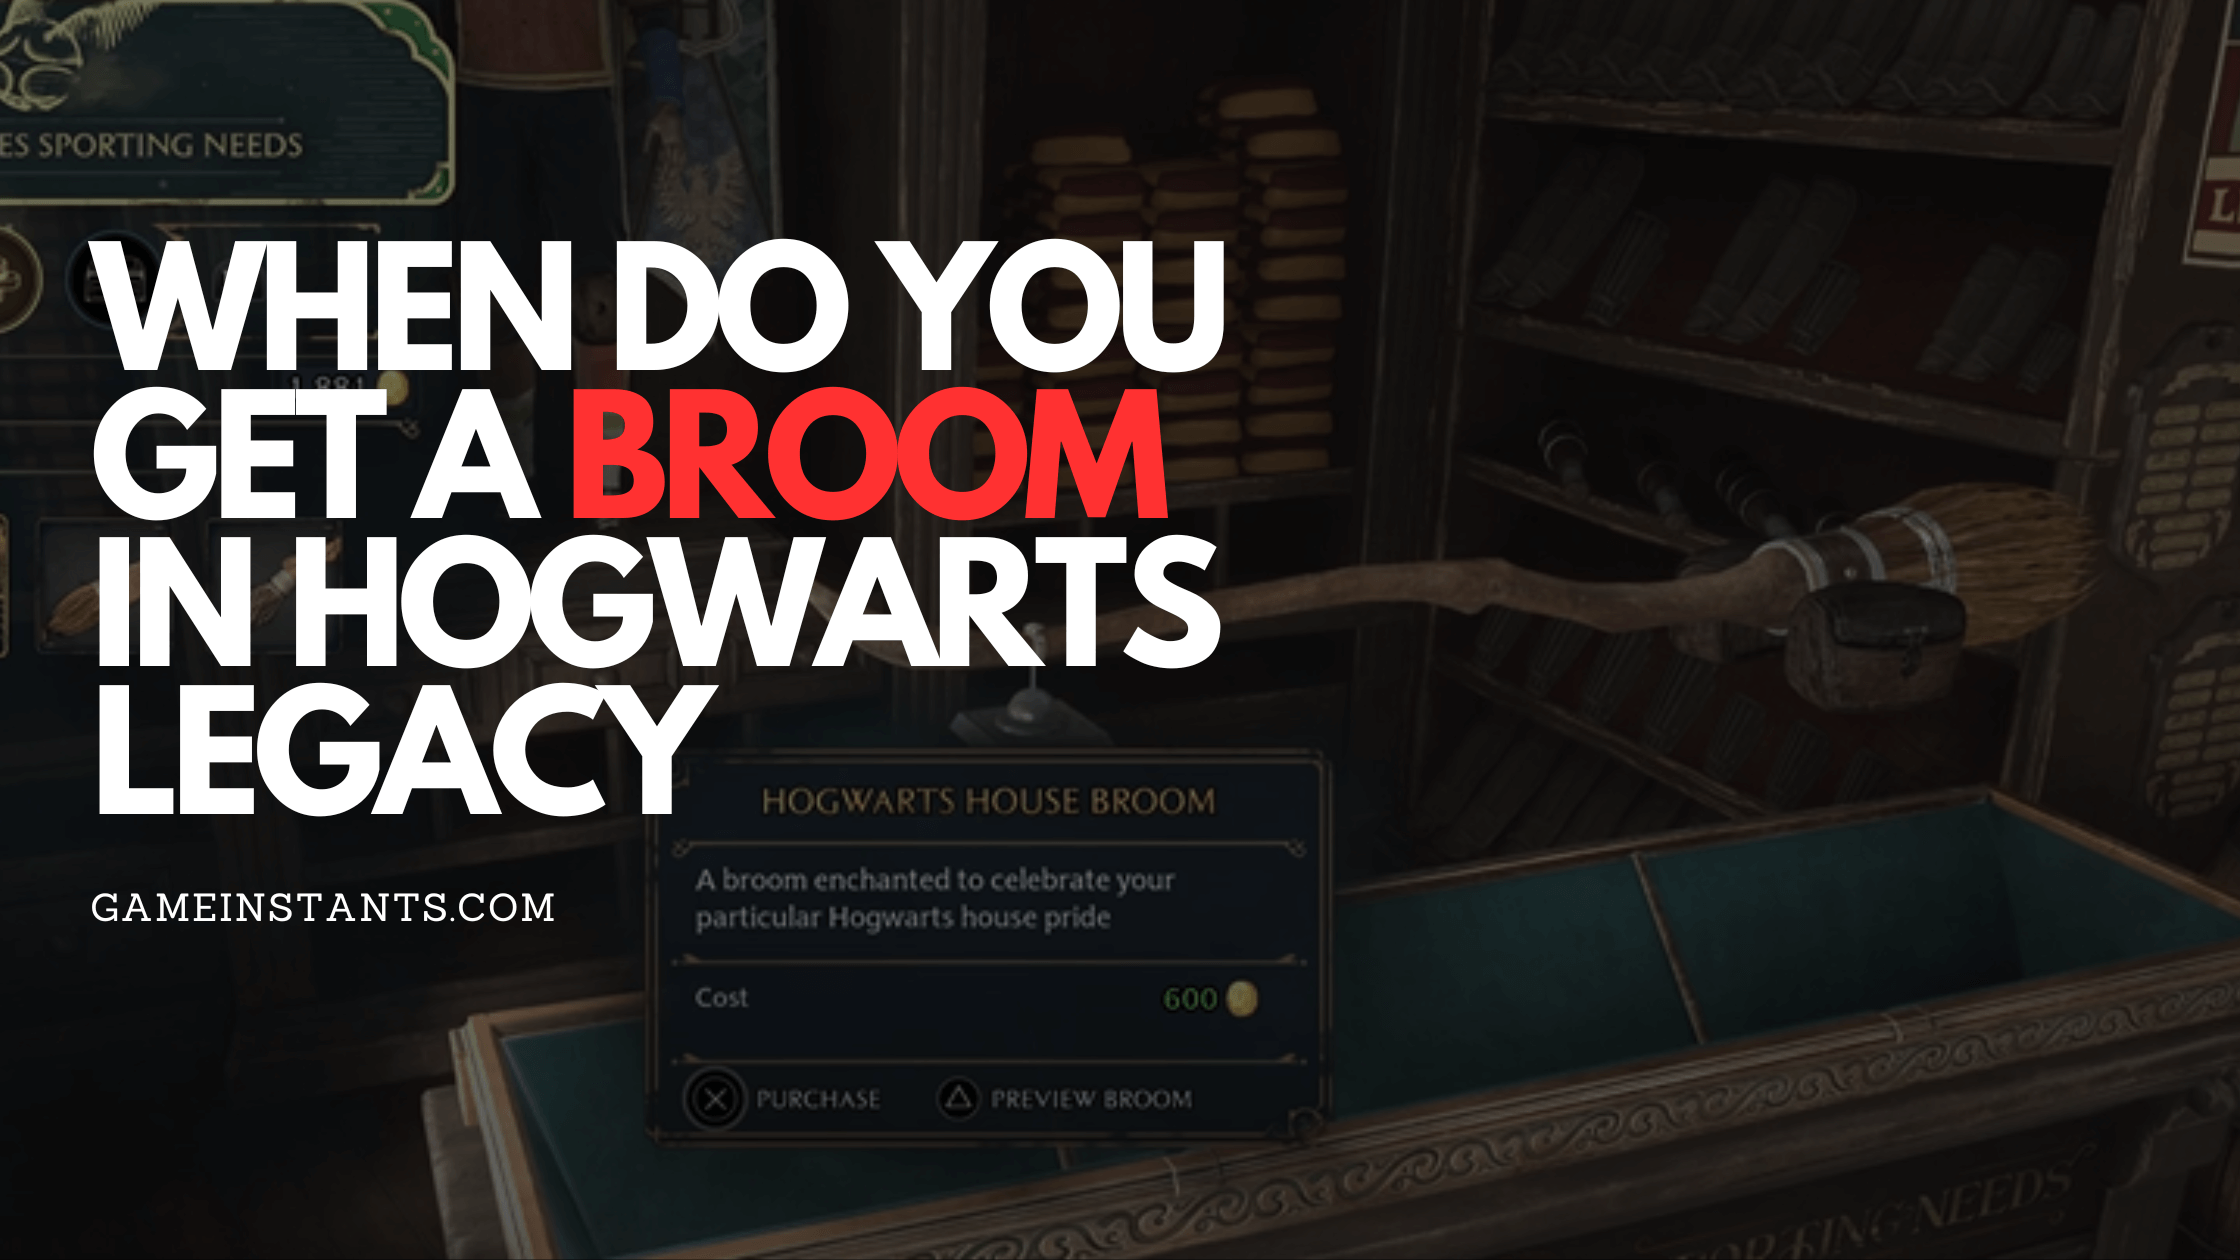 When Do You Get a Broom in Hogwarts Legacy